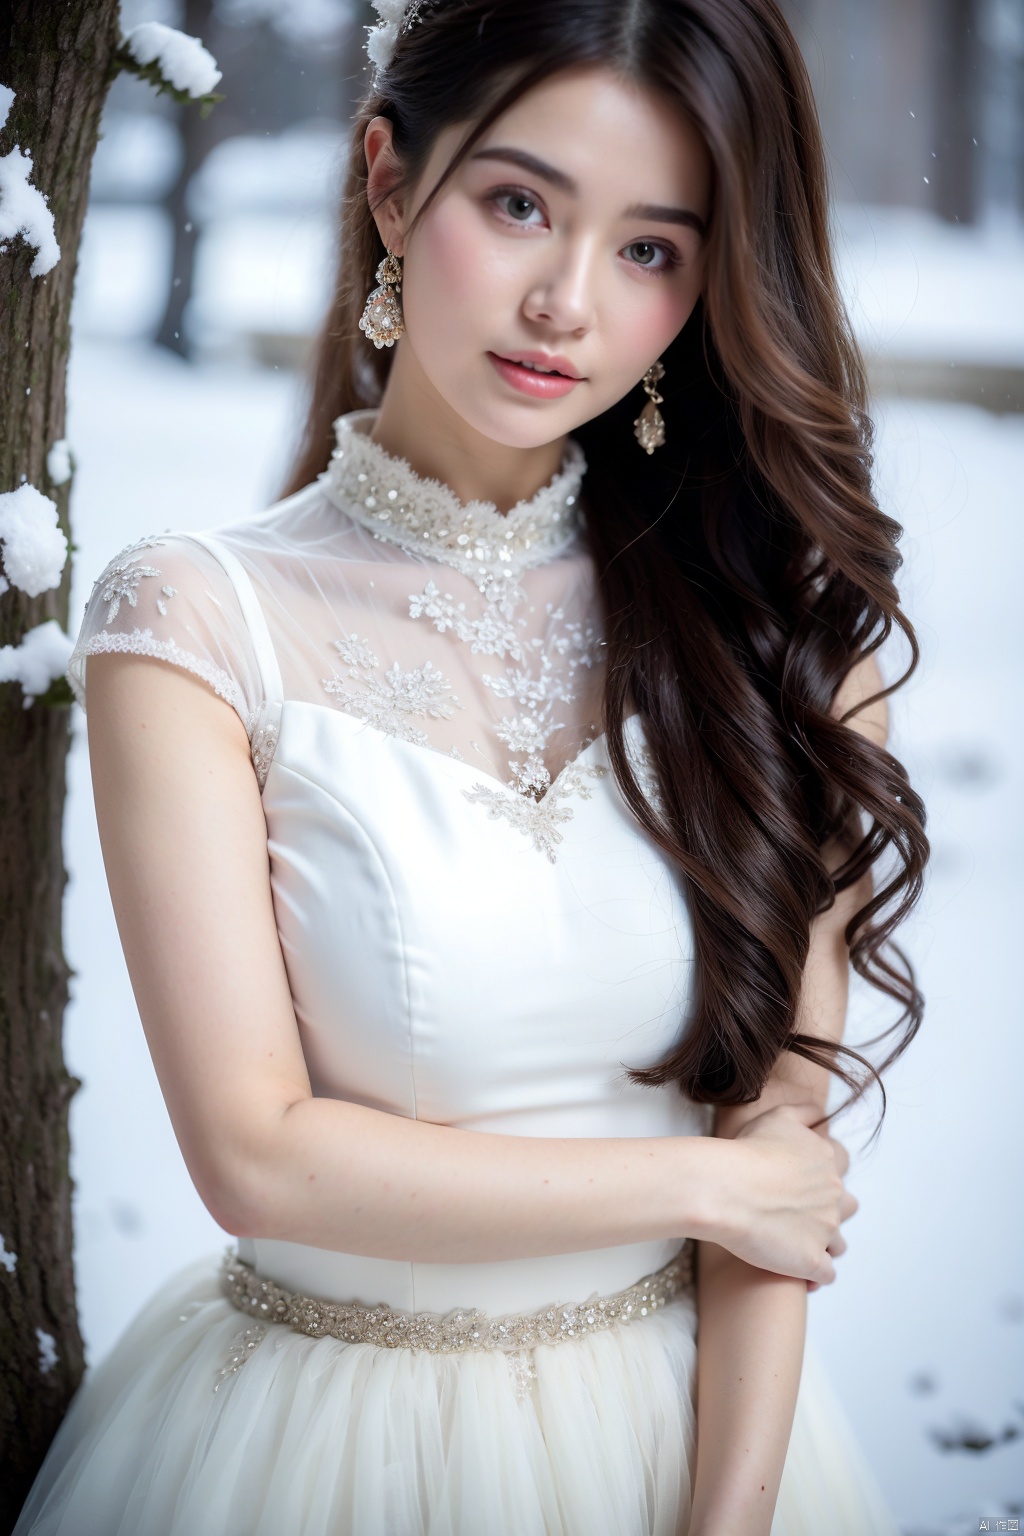 masterpiece, best quality, ultra high res, a beautiful woman in a lace dress in the winter snow, detailed description of the woman and dress, snow-covered environment, romantic and dreamy atmosphere,